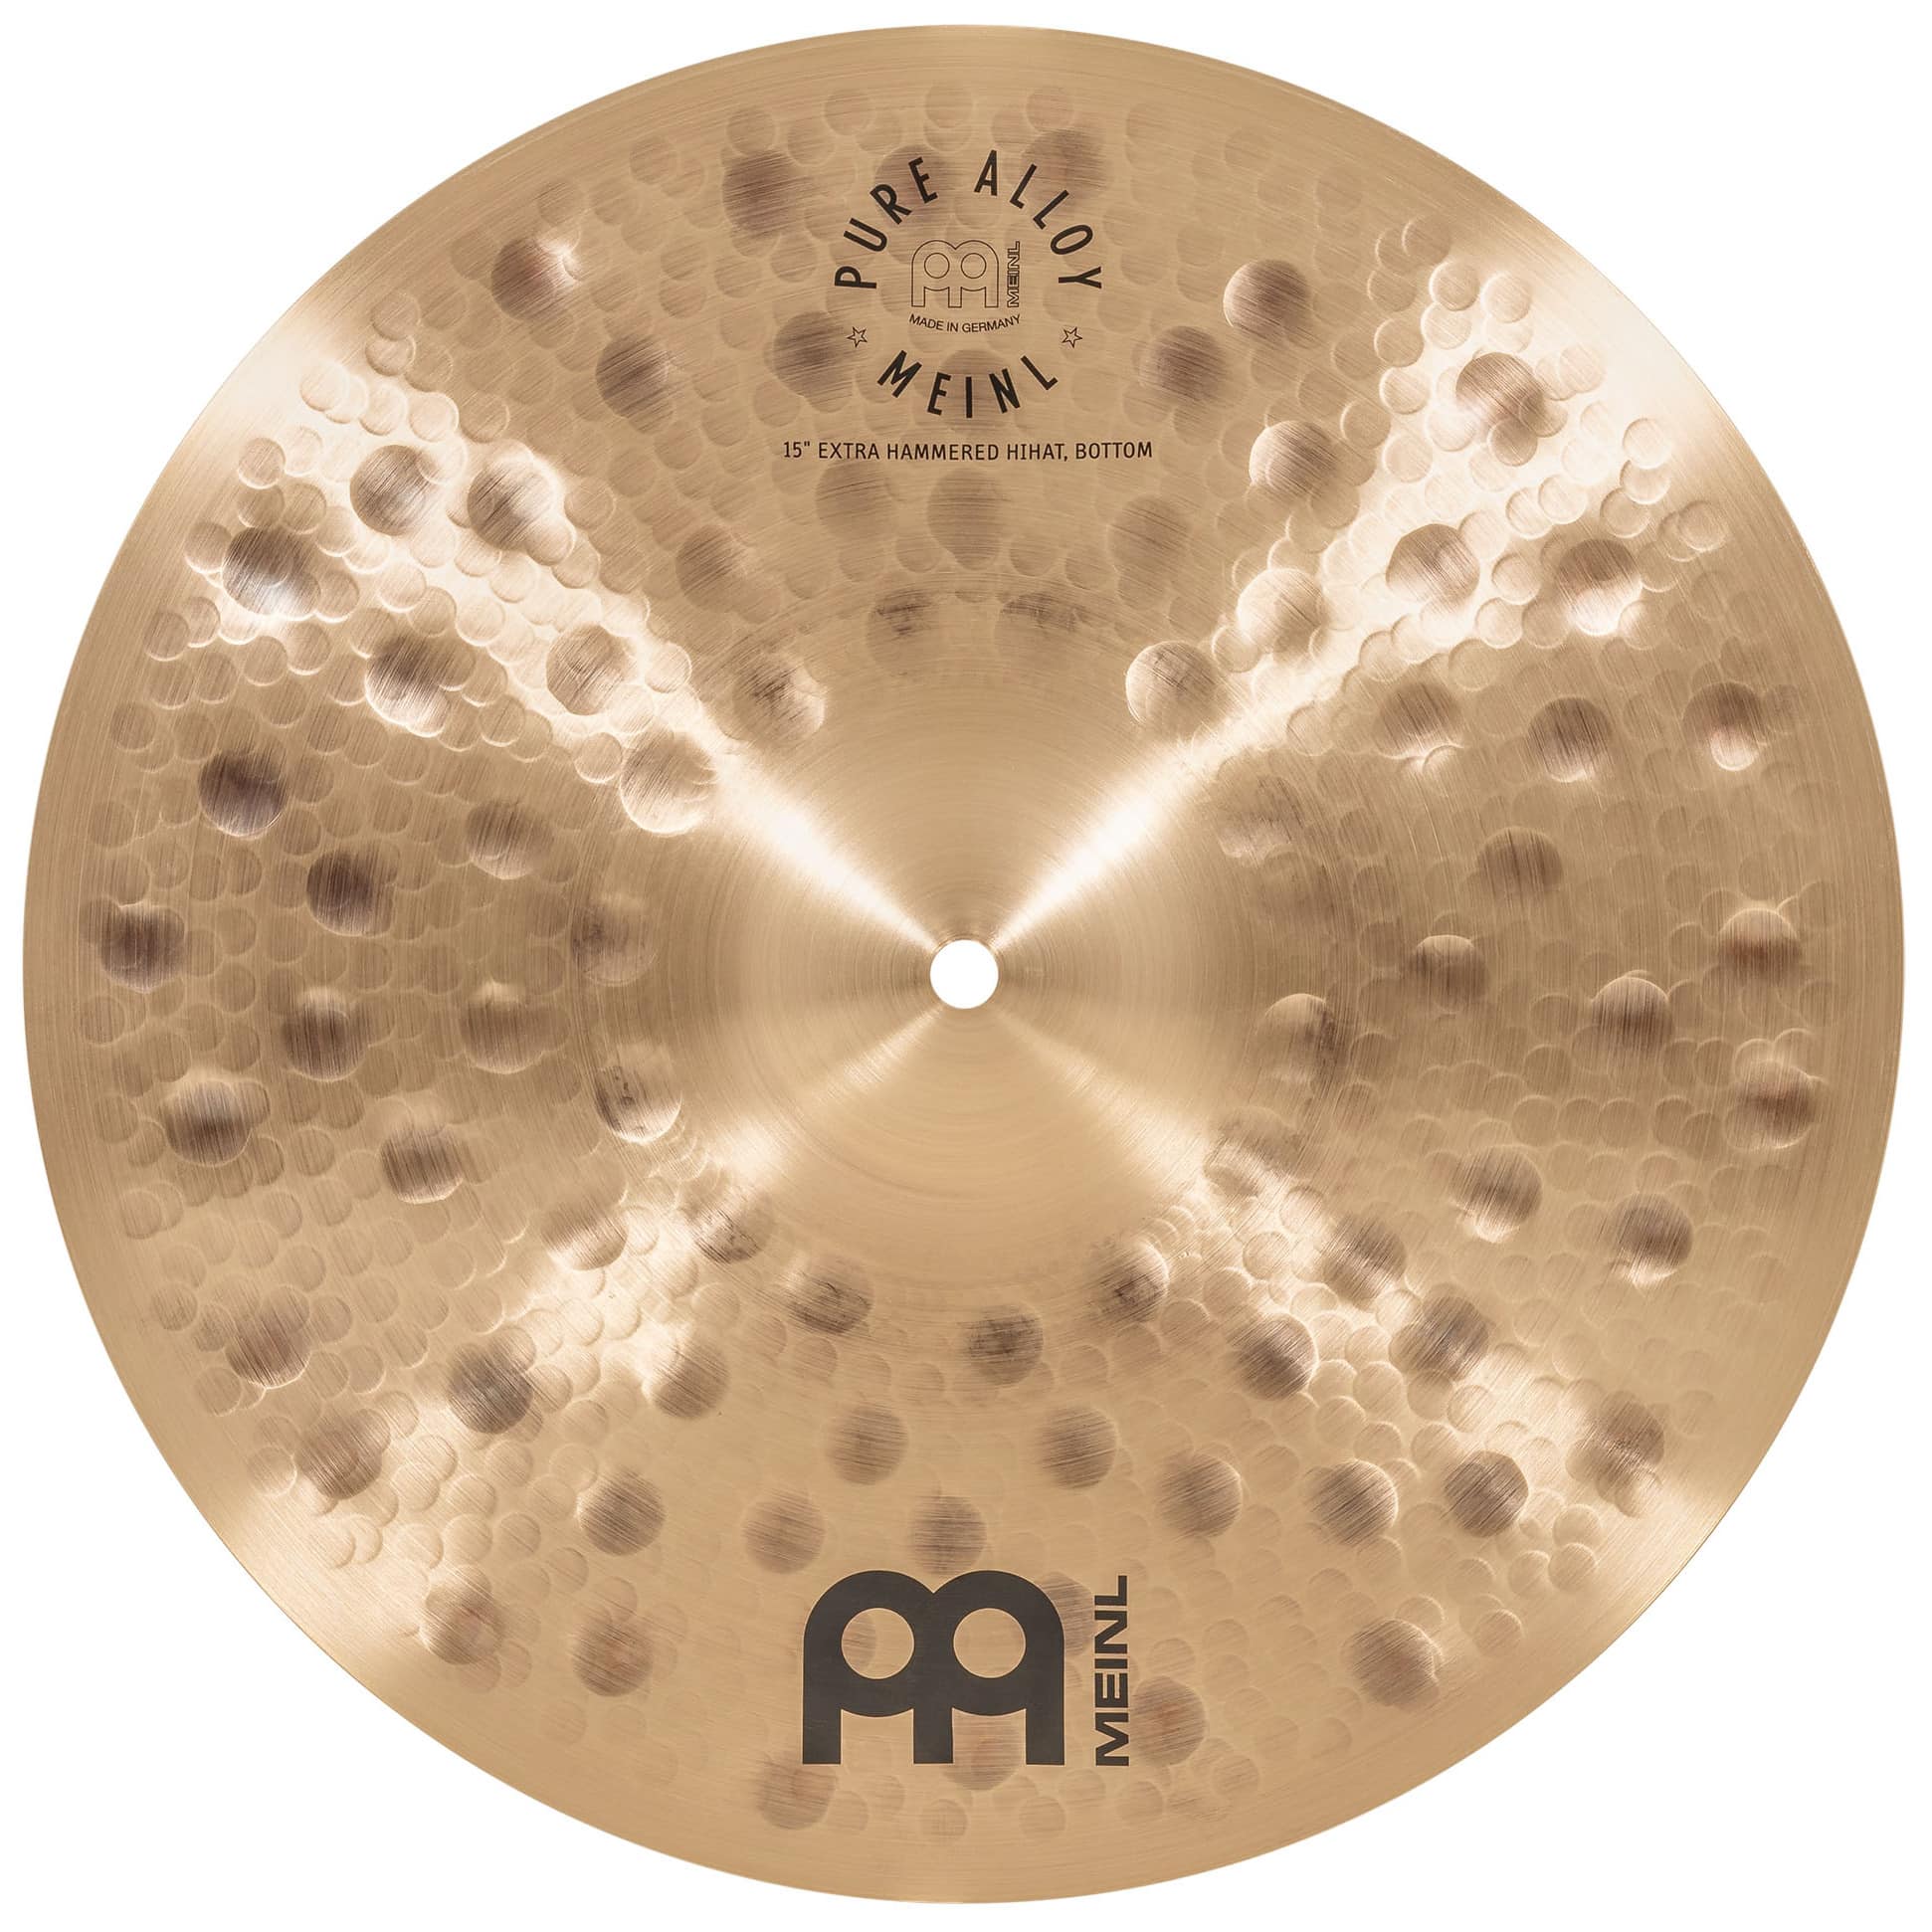 Meinl Cymbals PA15EHH - 15" Pure Alloy Extra Hammered Hihat 10